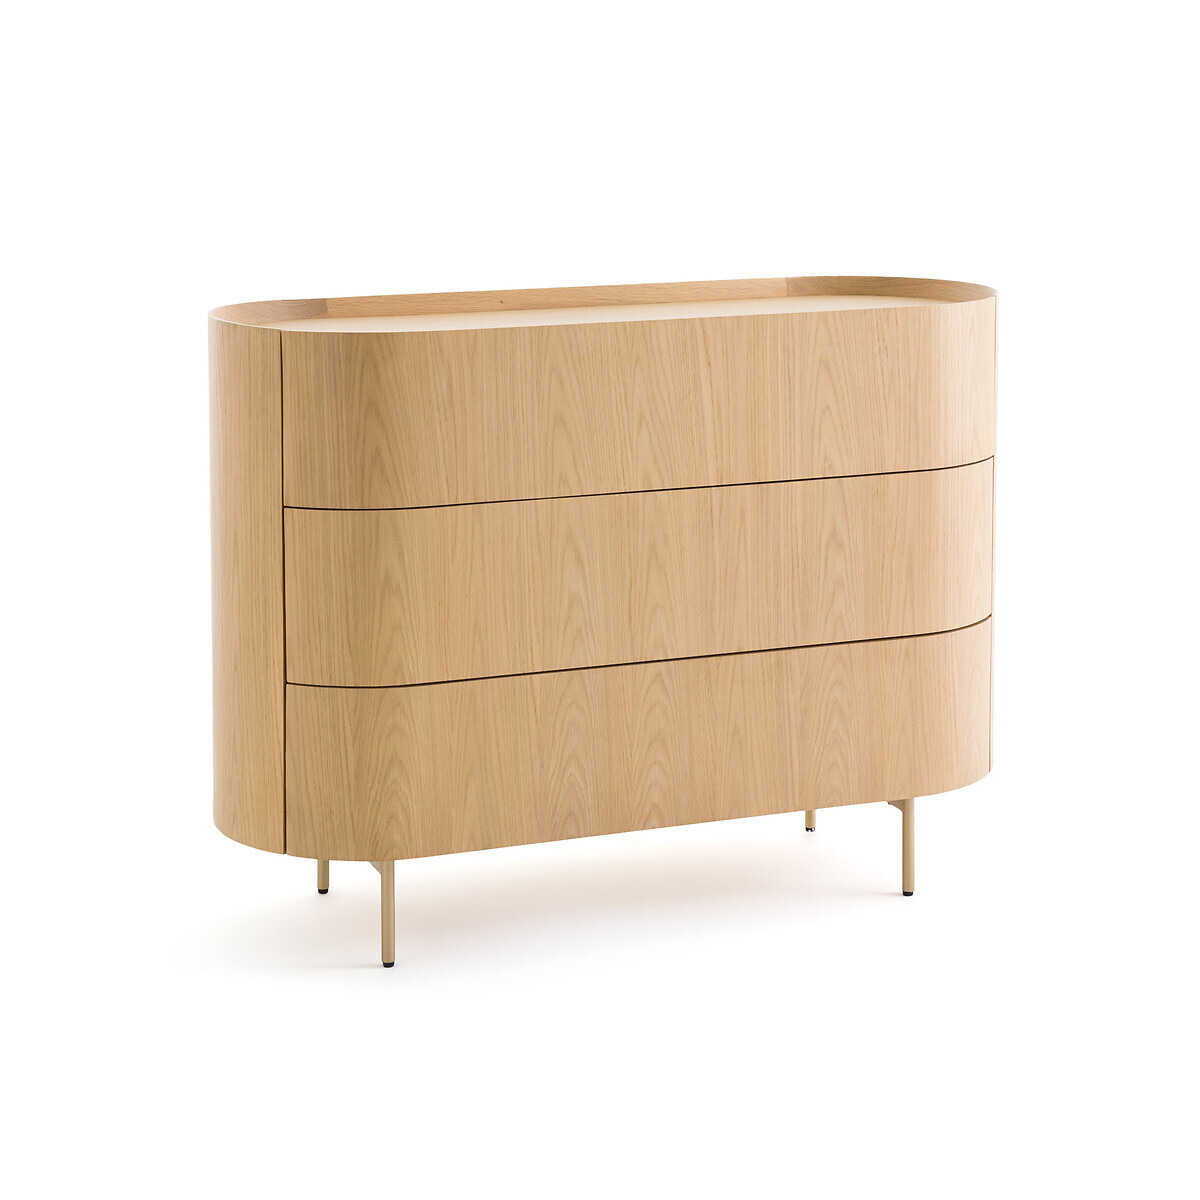 Aslen Solid Oak Chest of Drawers - image 1